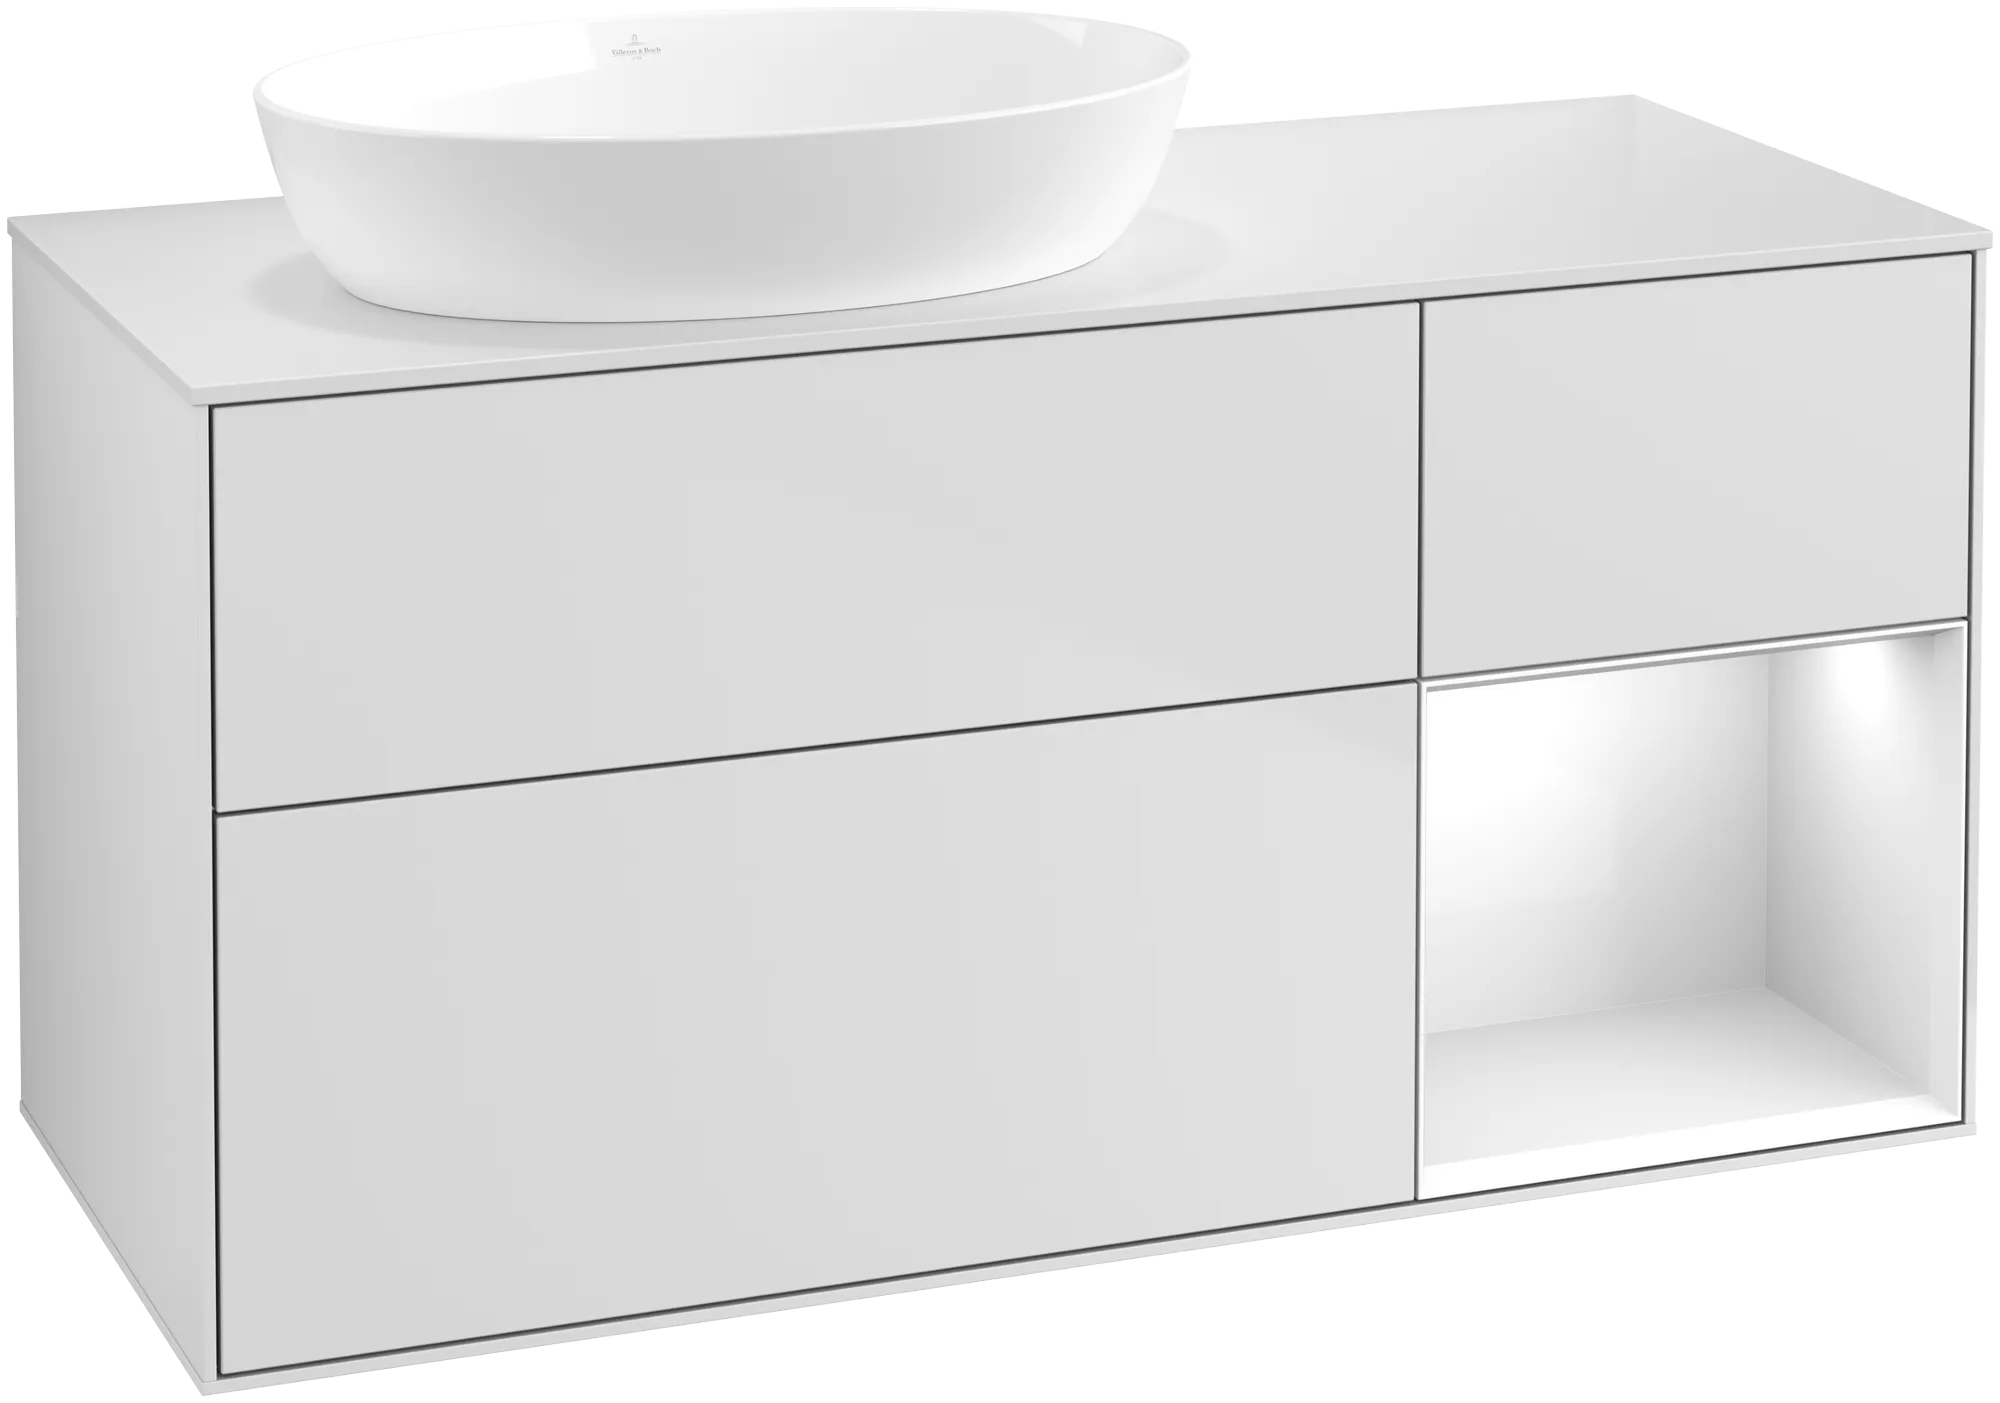 Picture of VILLEROY BOCH Finion Vanity unit, with lighting, 3 pull-out compartments, 1200 x 603 x 501 mm, White Matt Lacquer / Glossy White Lacquer / Glass White Matt #FA51GFMT